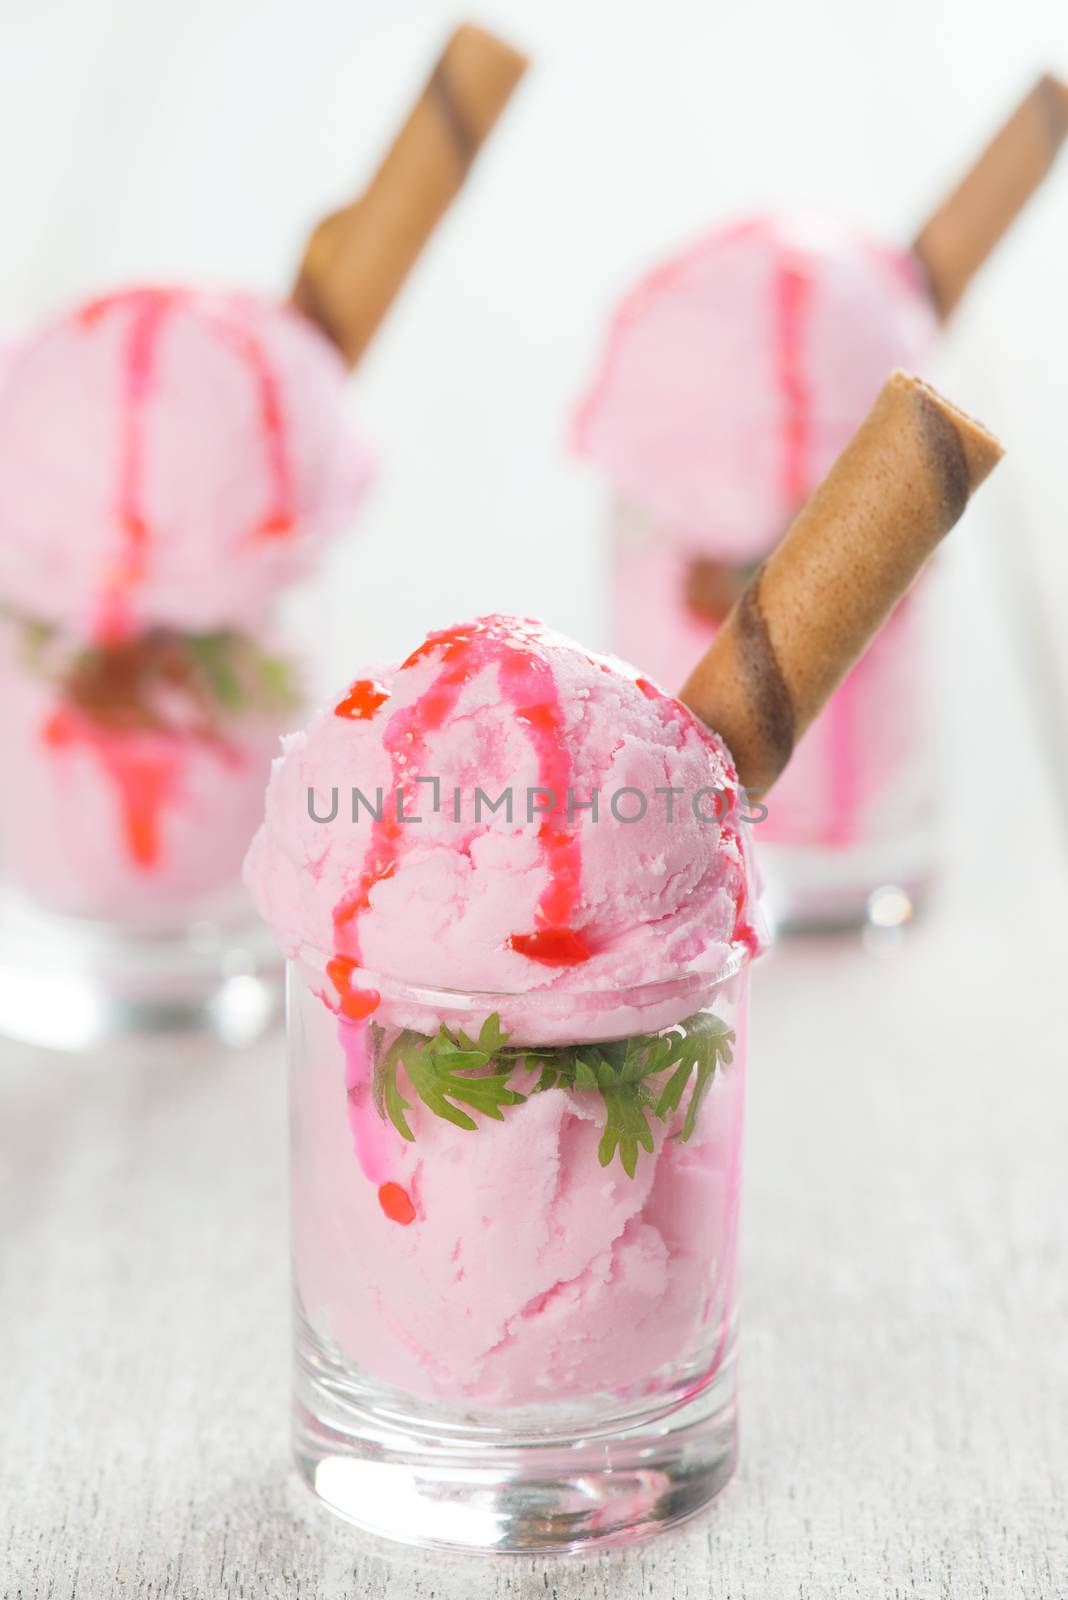 Scoops strawberry ice cream in glass cup with waffle on wooden vintage table background.